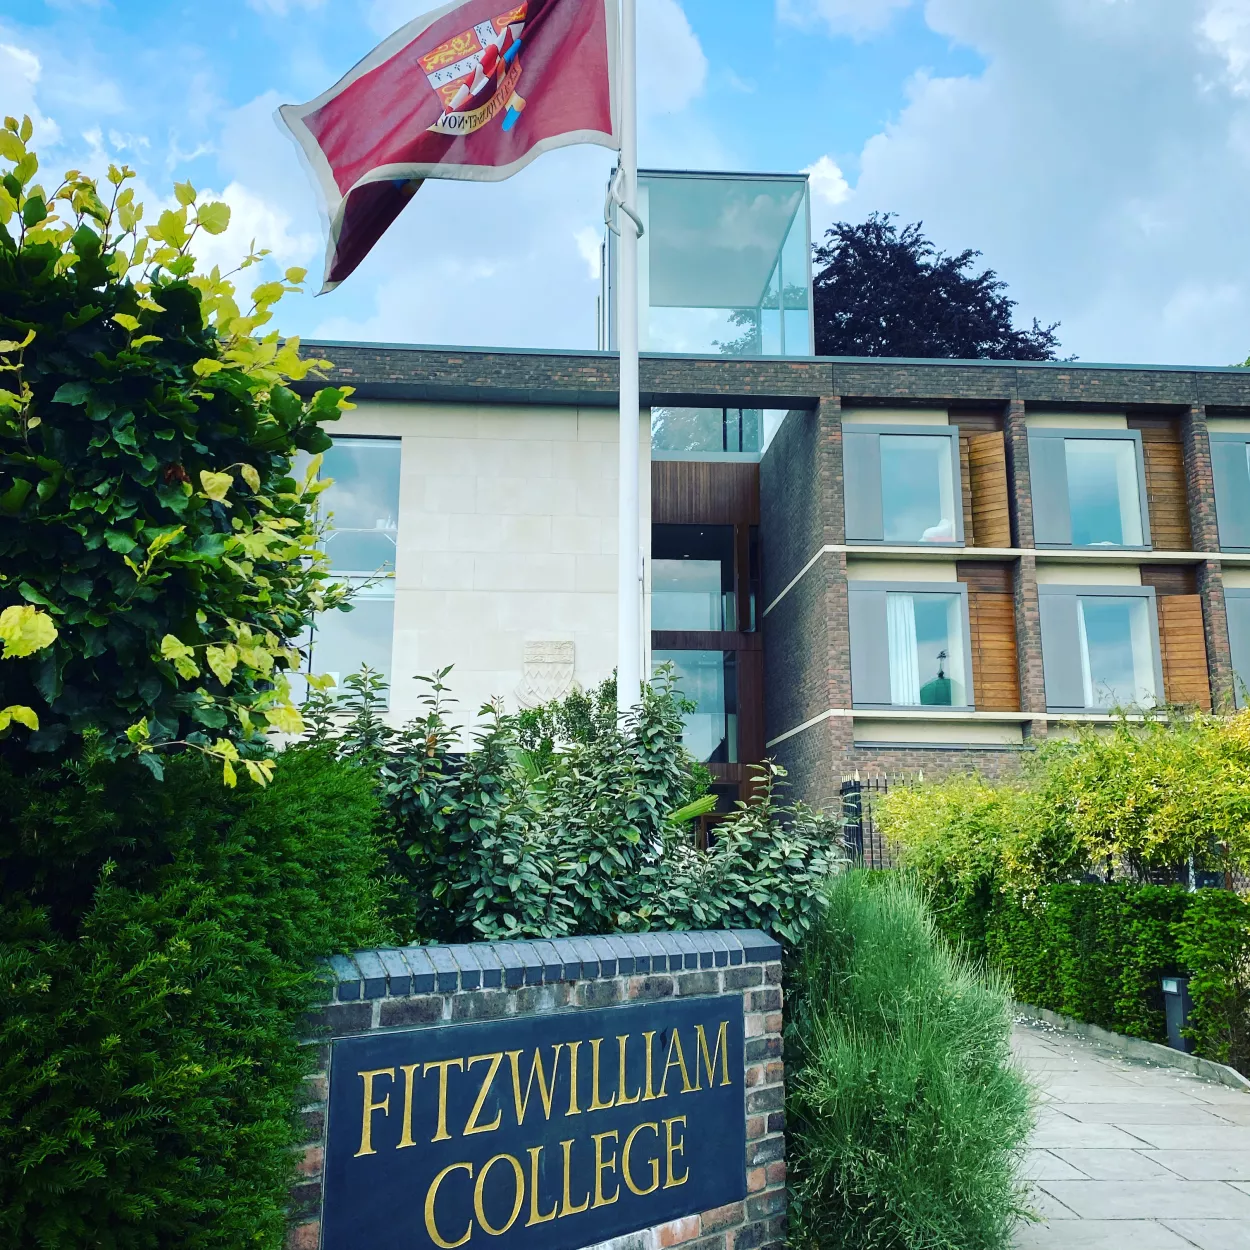 Gatehouse and college flag